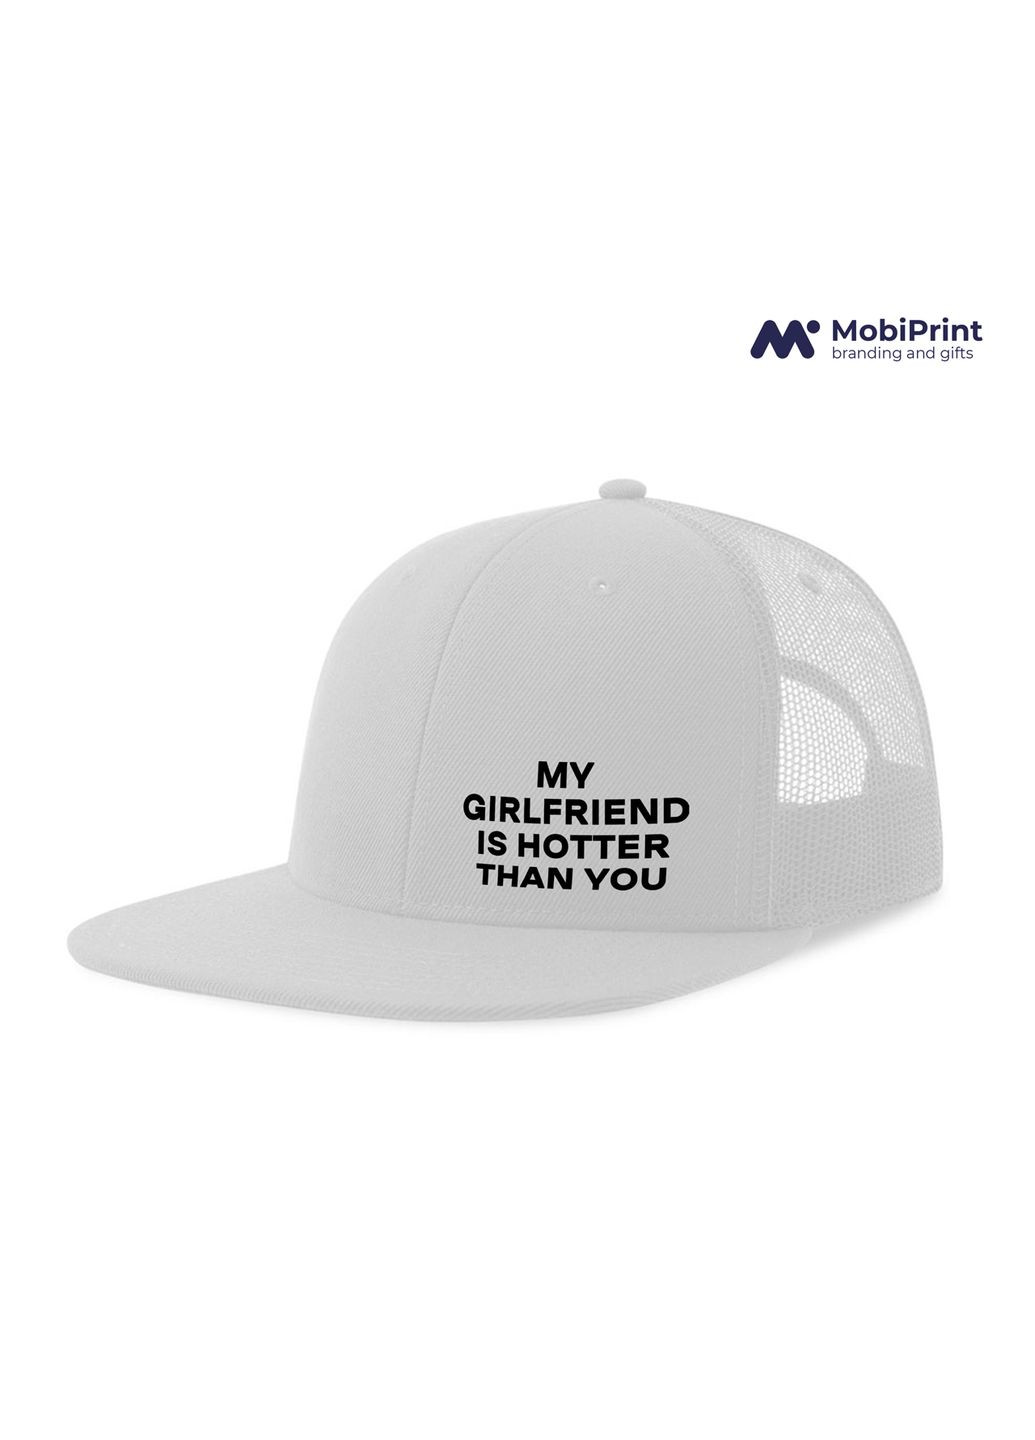 Кепка Snap Mesh My girlfriend hotter than you Белый (9277-4092-WT) MobiPrint (292866269)